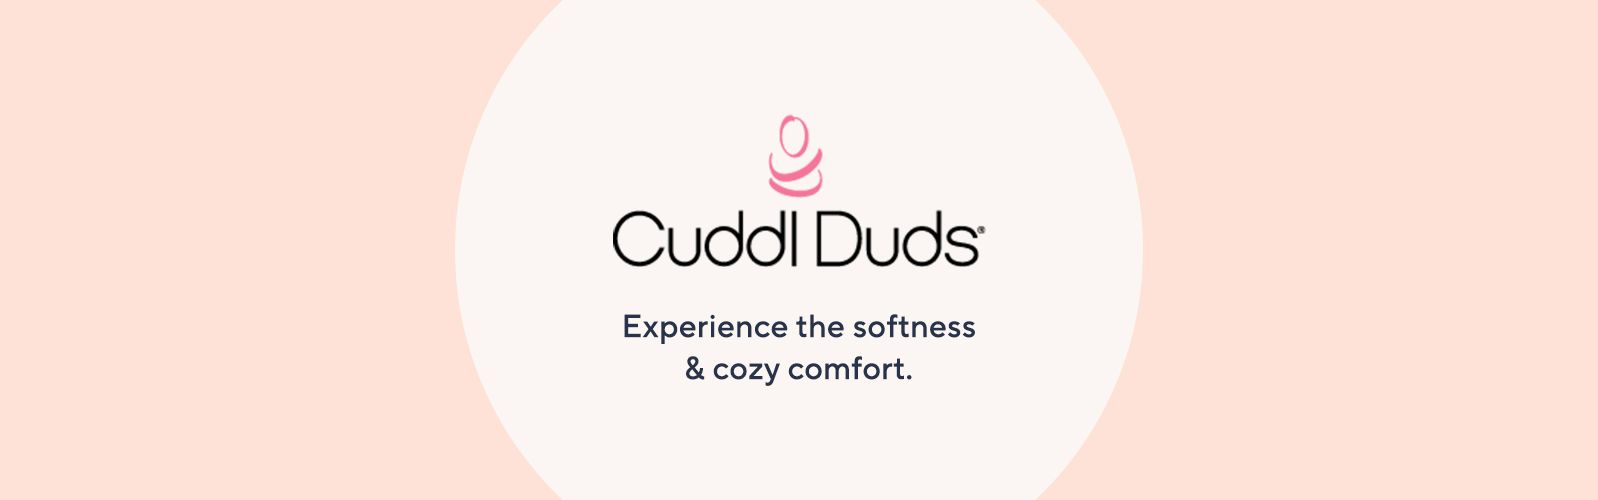 Cuddl Duds. Experience the softness & cozy comfort